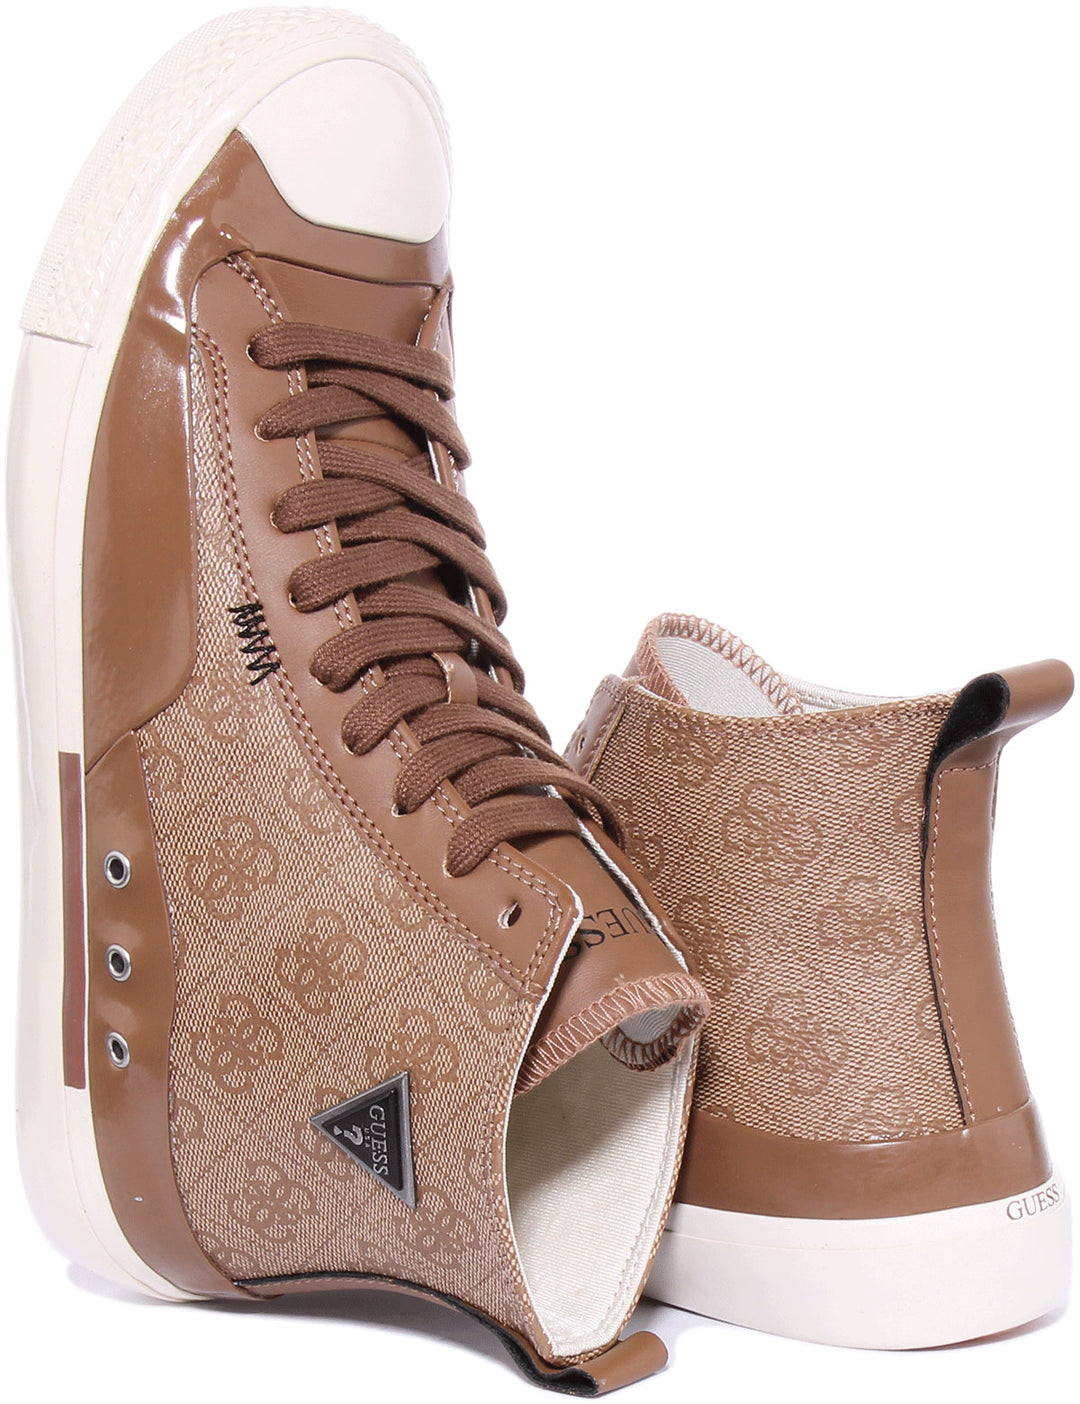 Guess Avaiano 4G High Top Trainer In Beige For Men